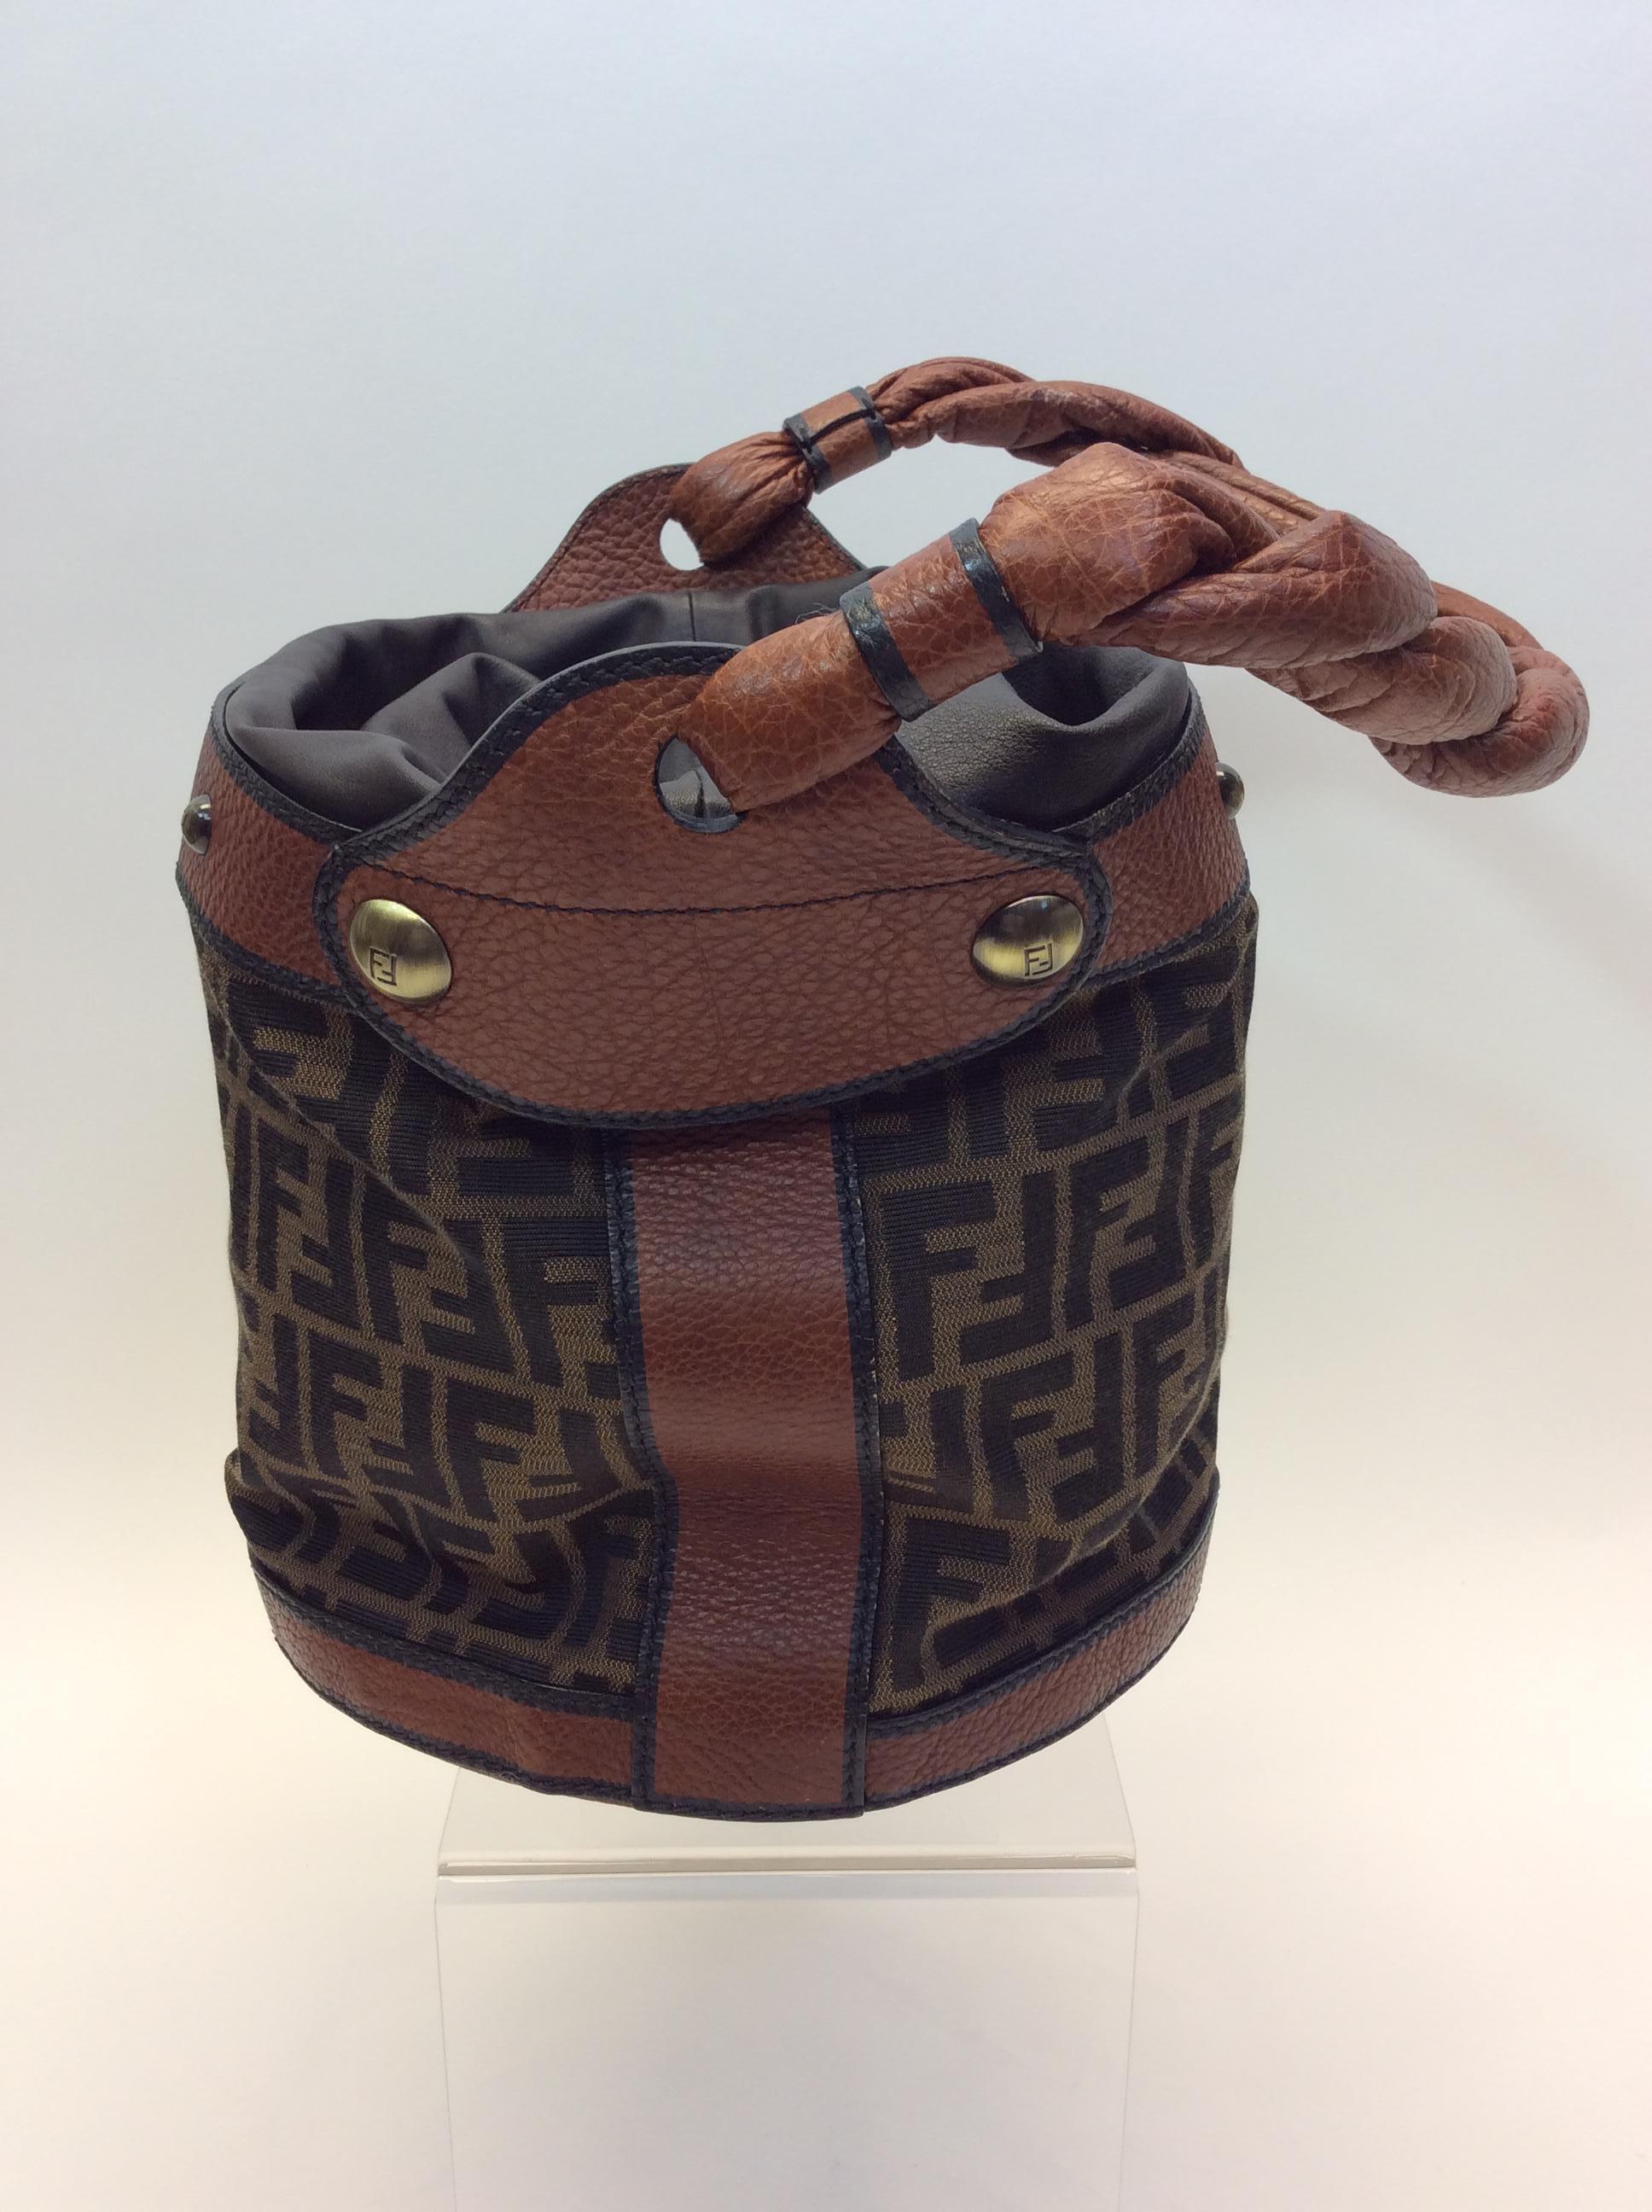 Fendi Monogram Brown Drawstring Bucket Bag In Excellent Condition For Sale In Narberth, PA